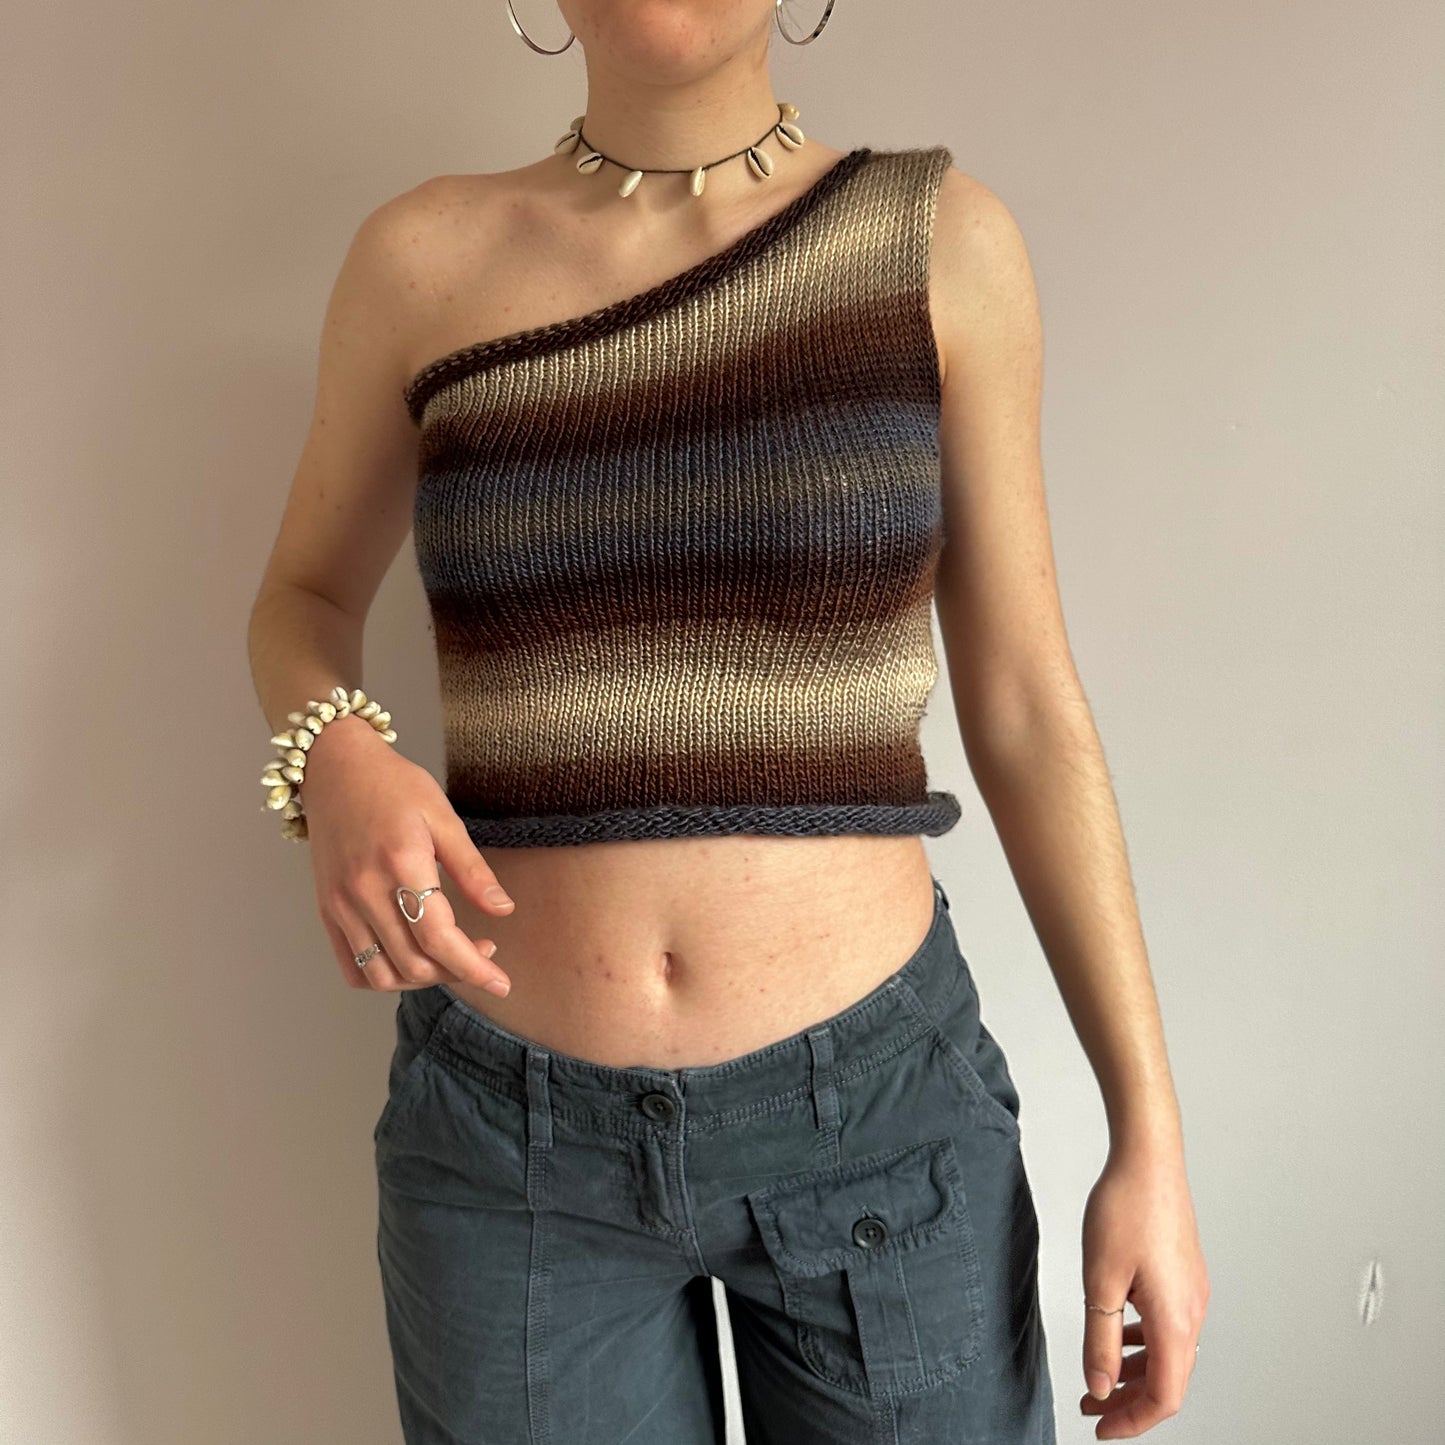 Handmade knitted one shoulder asymmetrical top in Seashell colourway